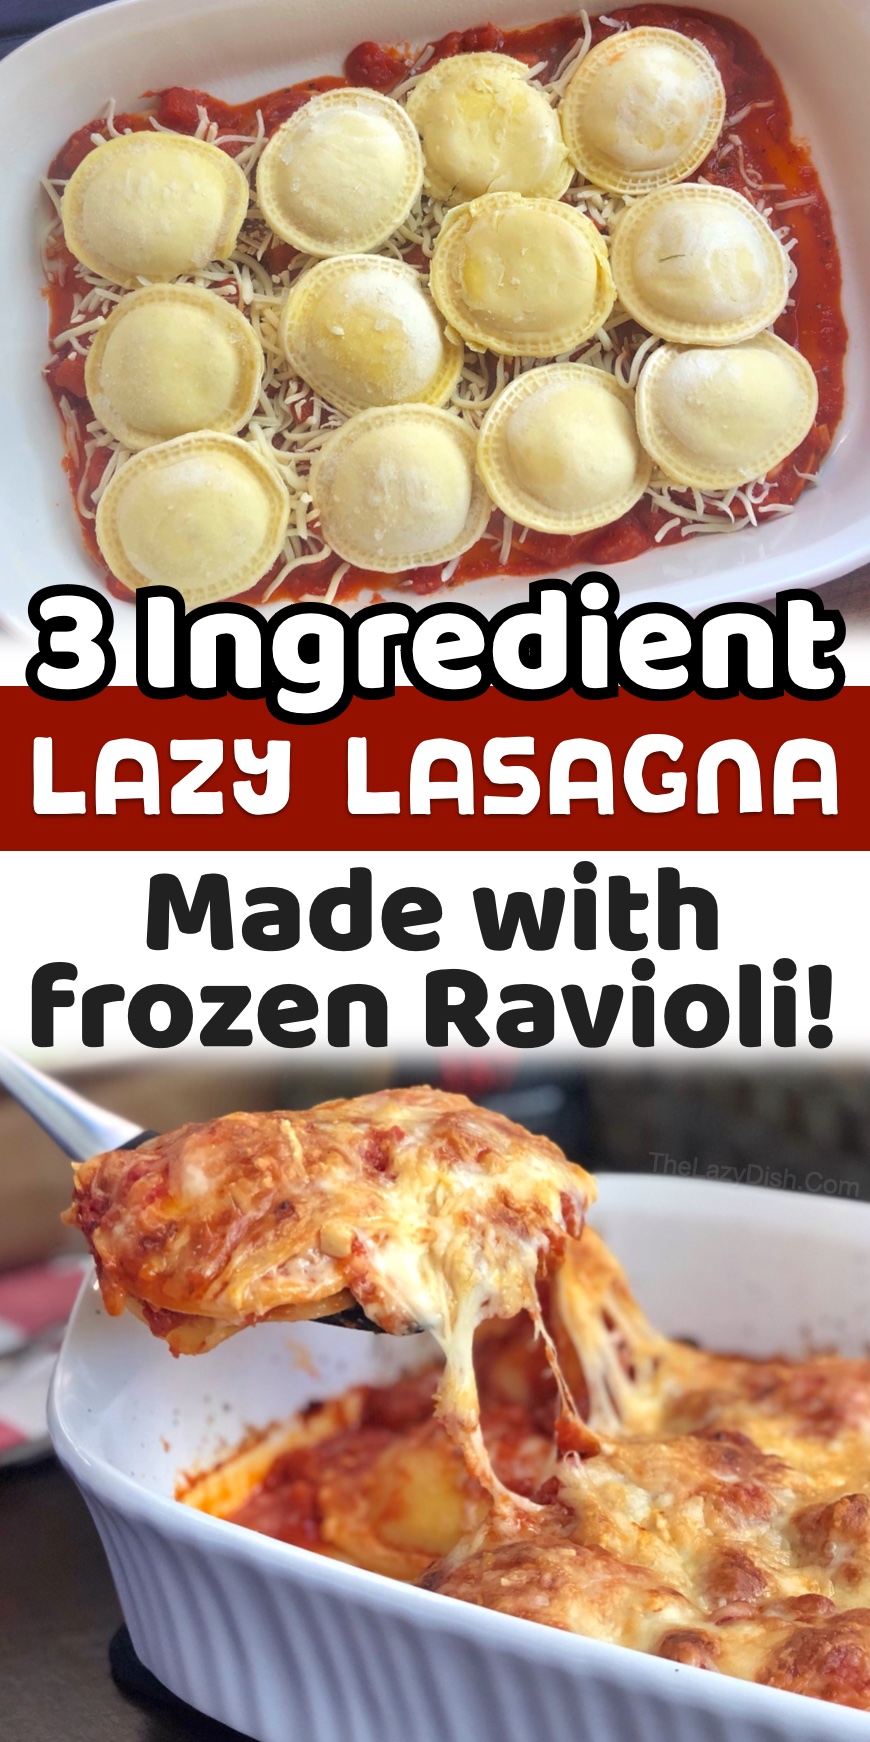 Calling all busy moms! Do you have a family with picky eaters to feed? My kids love this baked ravioli lazy lasagna. This popular dinner recipe is basically a dump meal. Just layer frozen cheese ravioli with pasta sauce and cheese in a baking dish. You can't mess up this quick and easy dinner. It's vegetarian but you can also add ground beef or sausage to the sauce, as well as some healthy veggies to the layers if you'd like. Make it your way! It's super versatile.